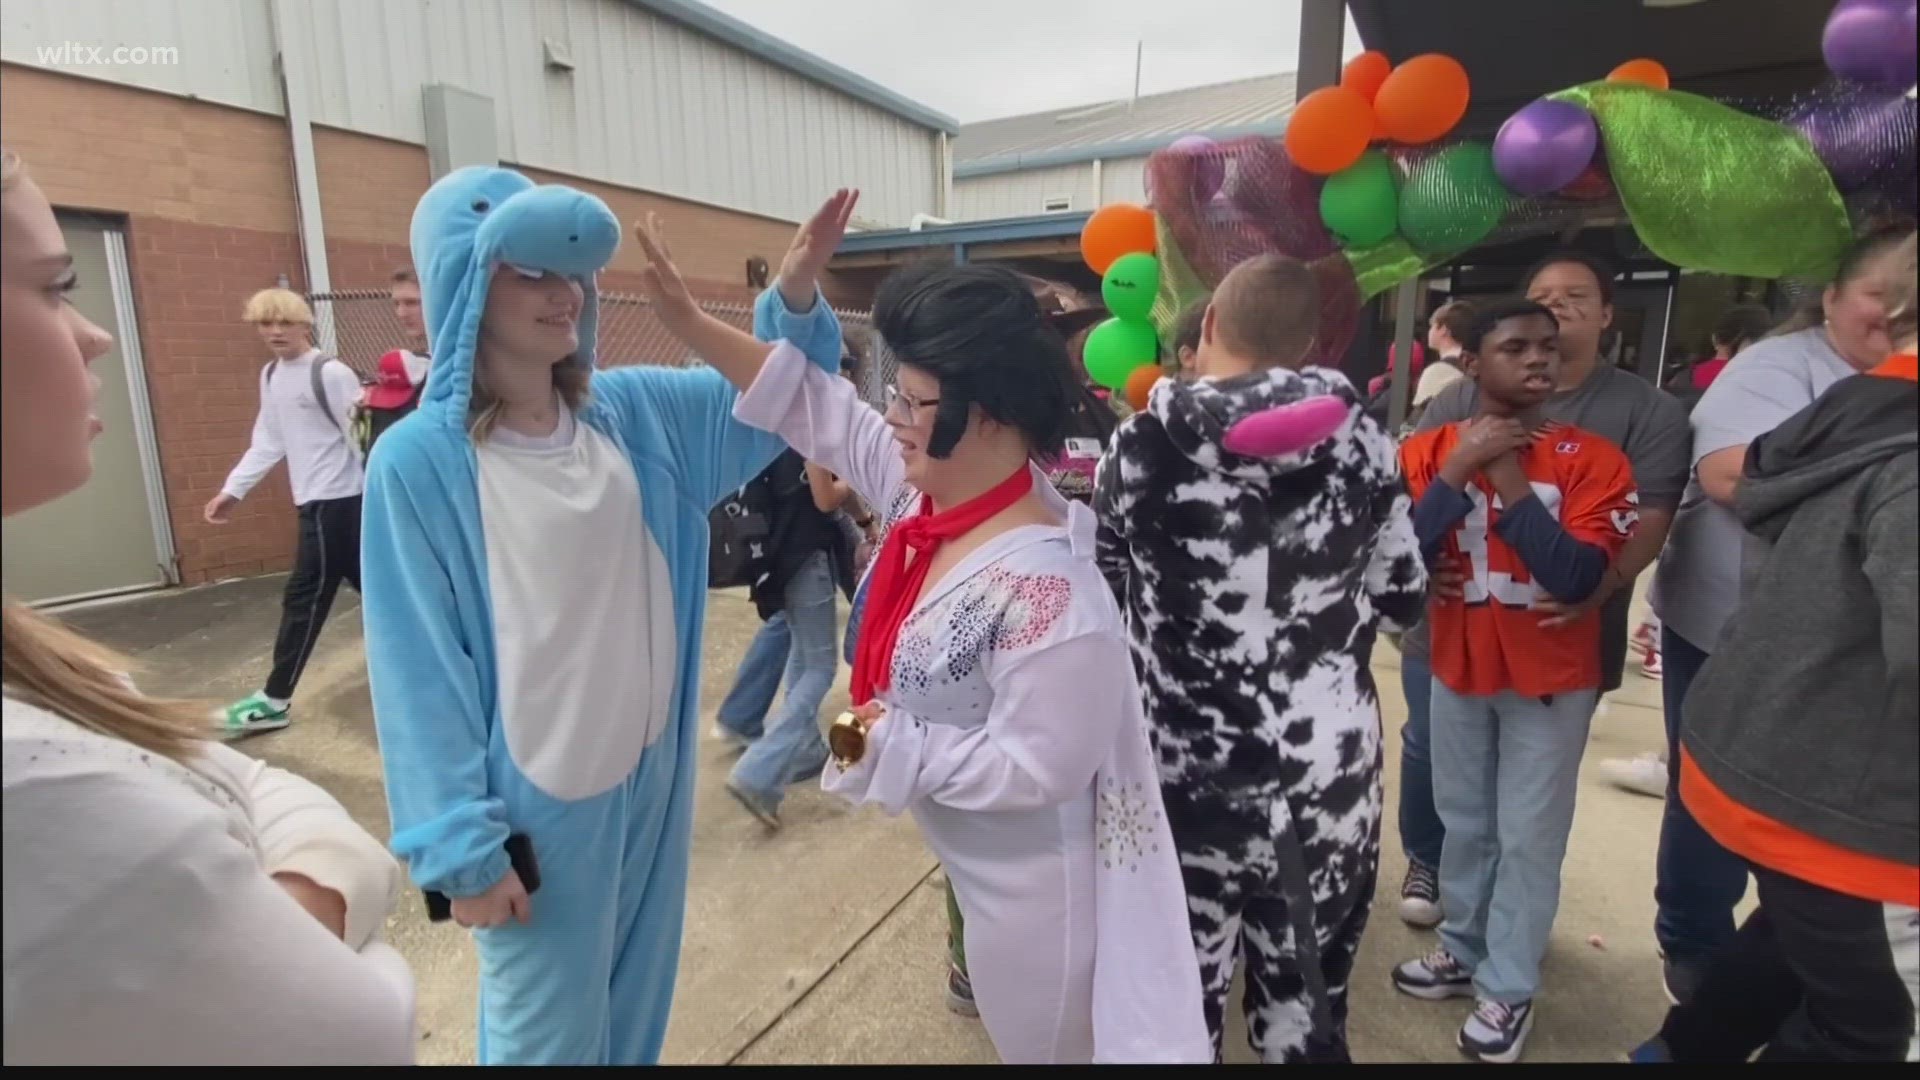 It was a Halloween party at Lugoff-Elgin high school for 60 Special Olympics athletes.